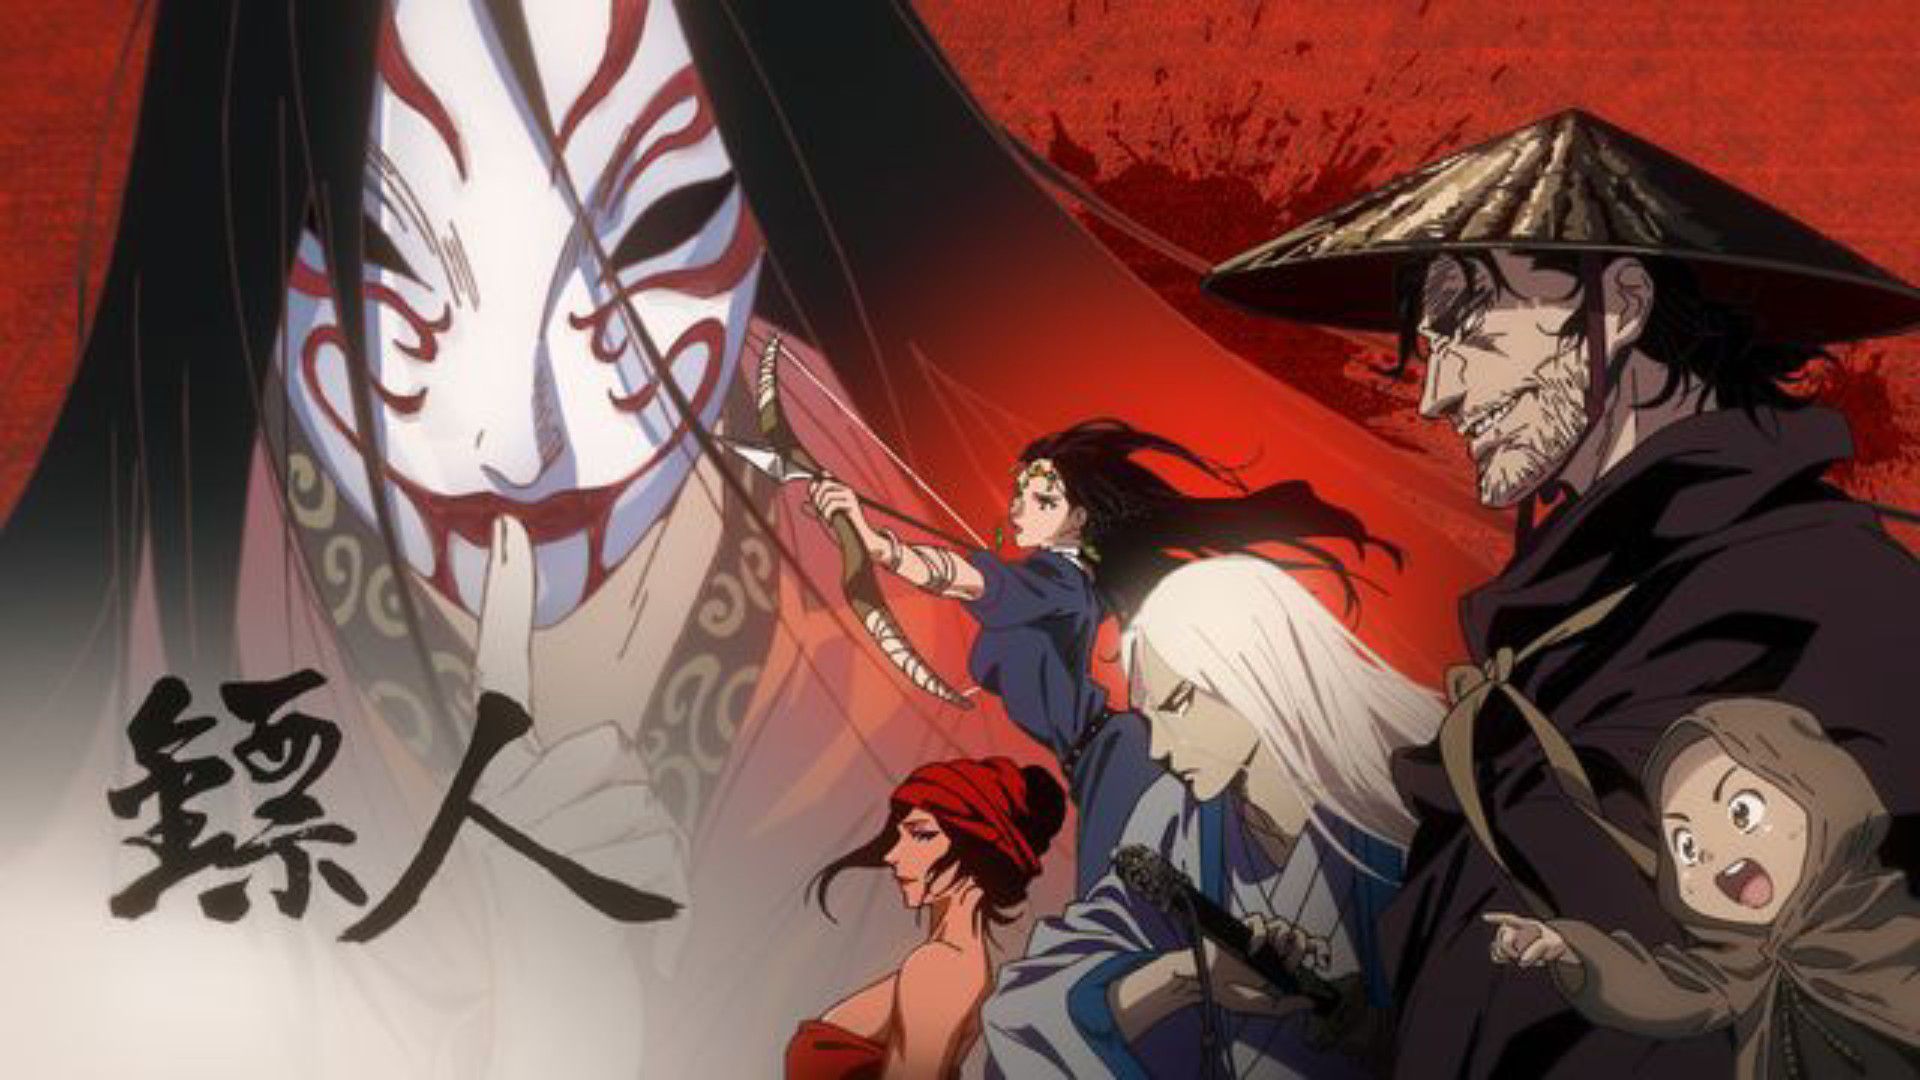 Get To Know The Characters Of Biao Ren: Blades Of The Guardians Anime